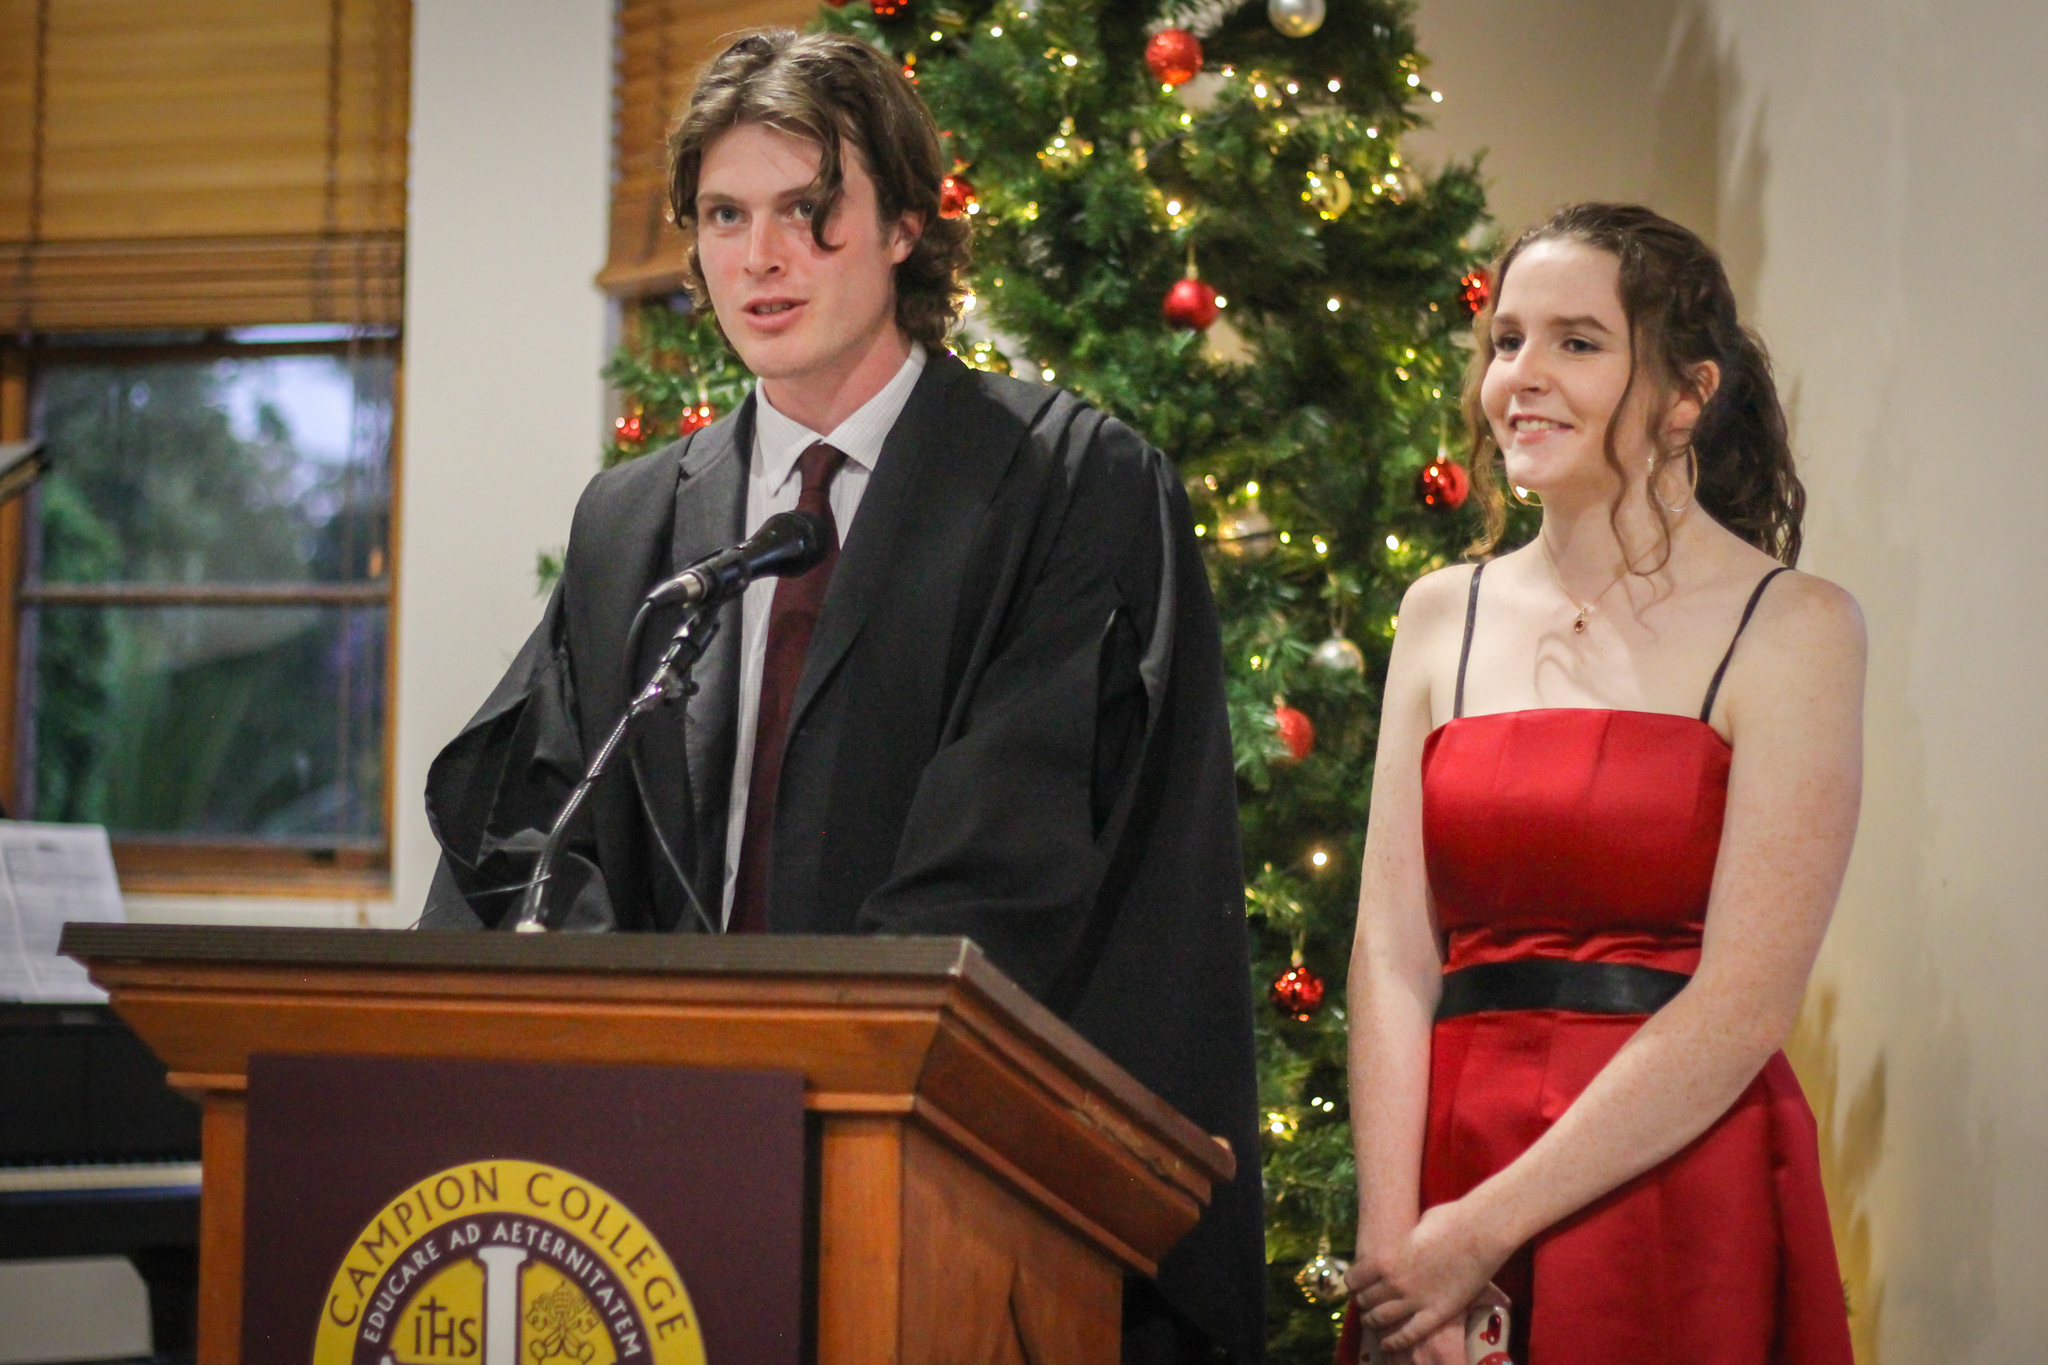 Campion wraps up academic year with last ‘Réveillon’ in dining hall